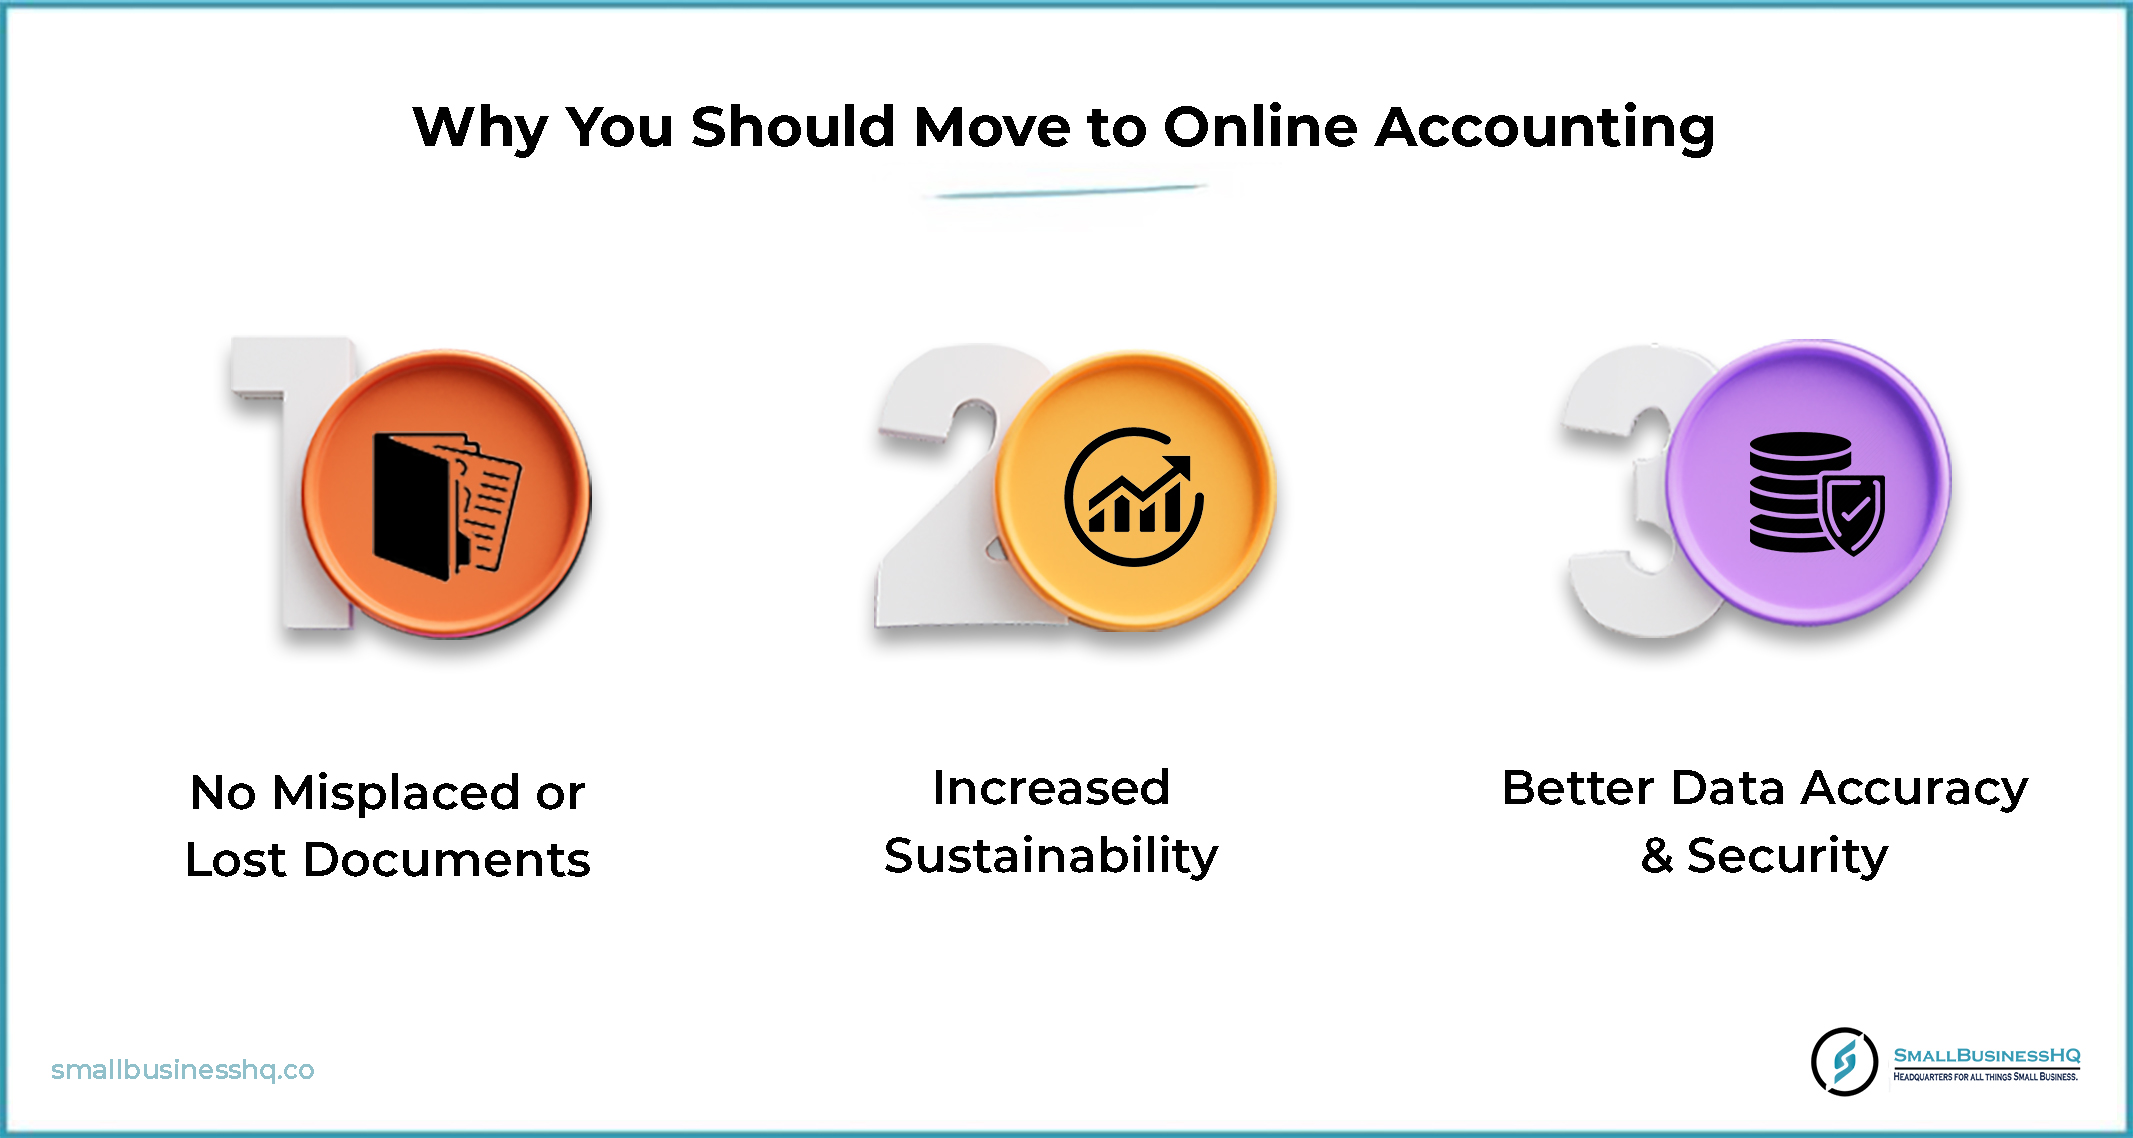 Why You Should Move to Online Accounting